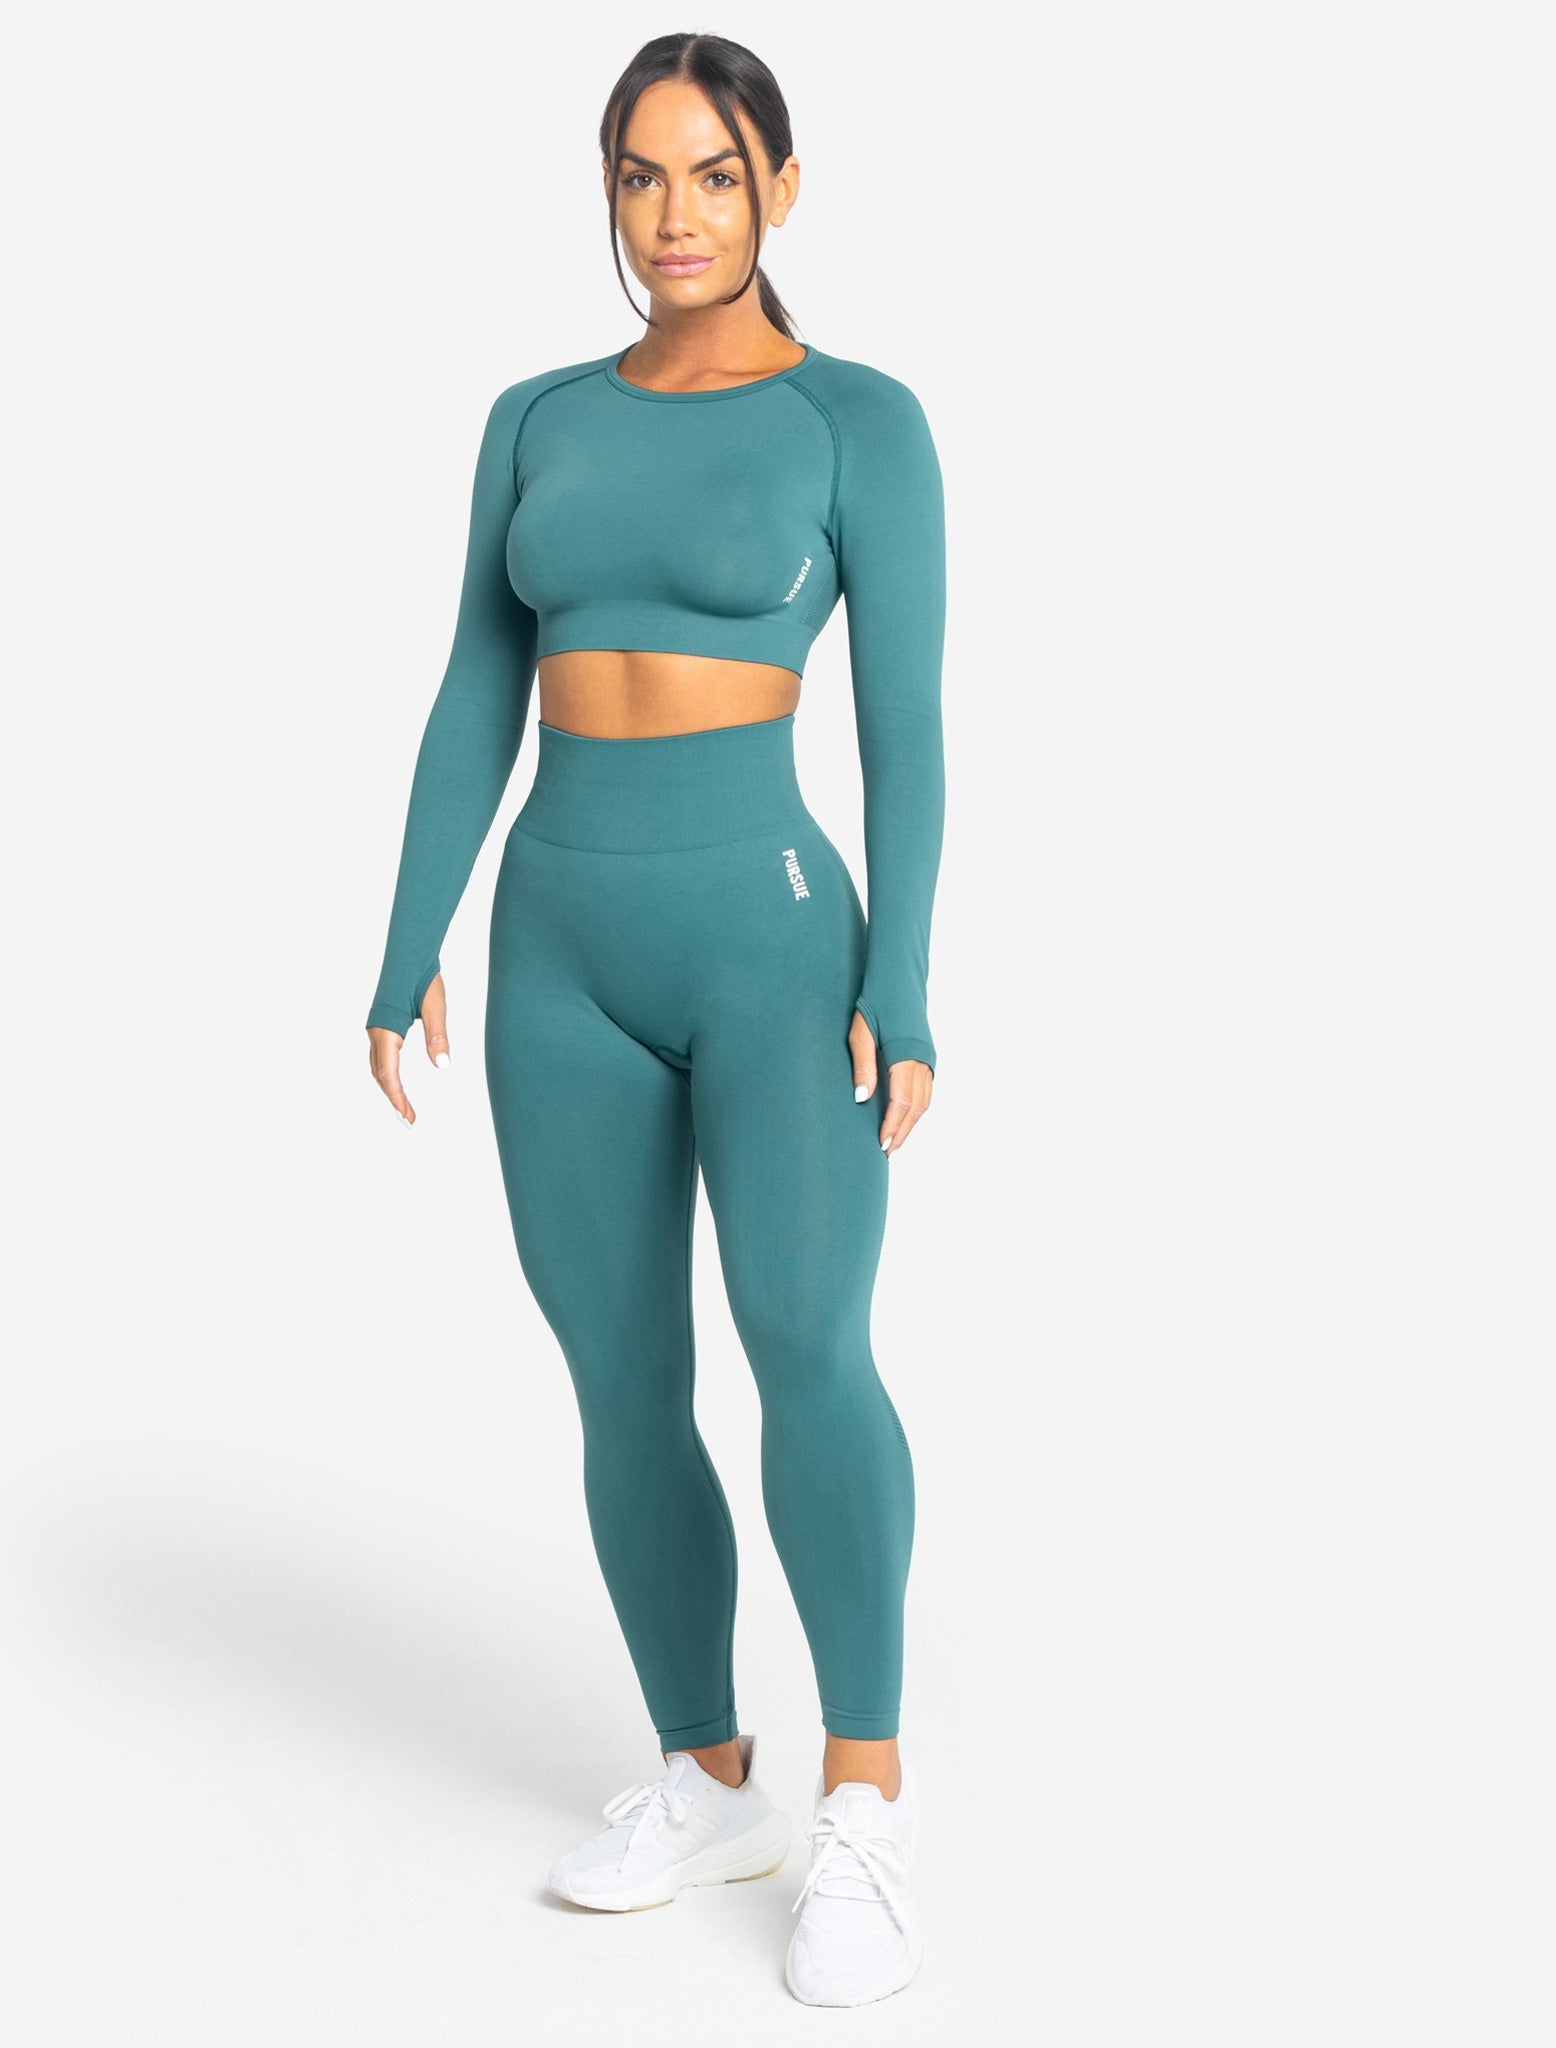 Move Seamless Long Sleeve Crop Top / Teal Pursue Fitness 2